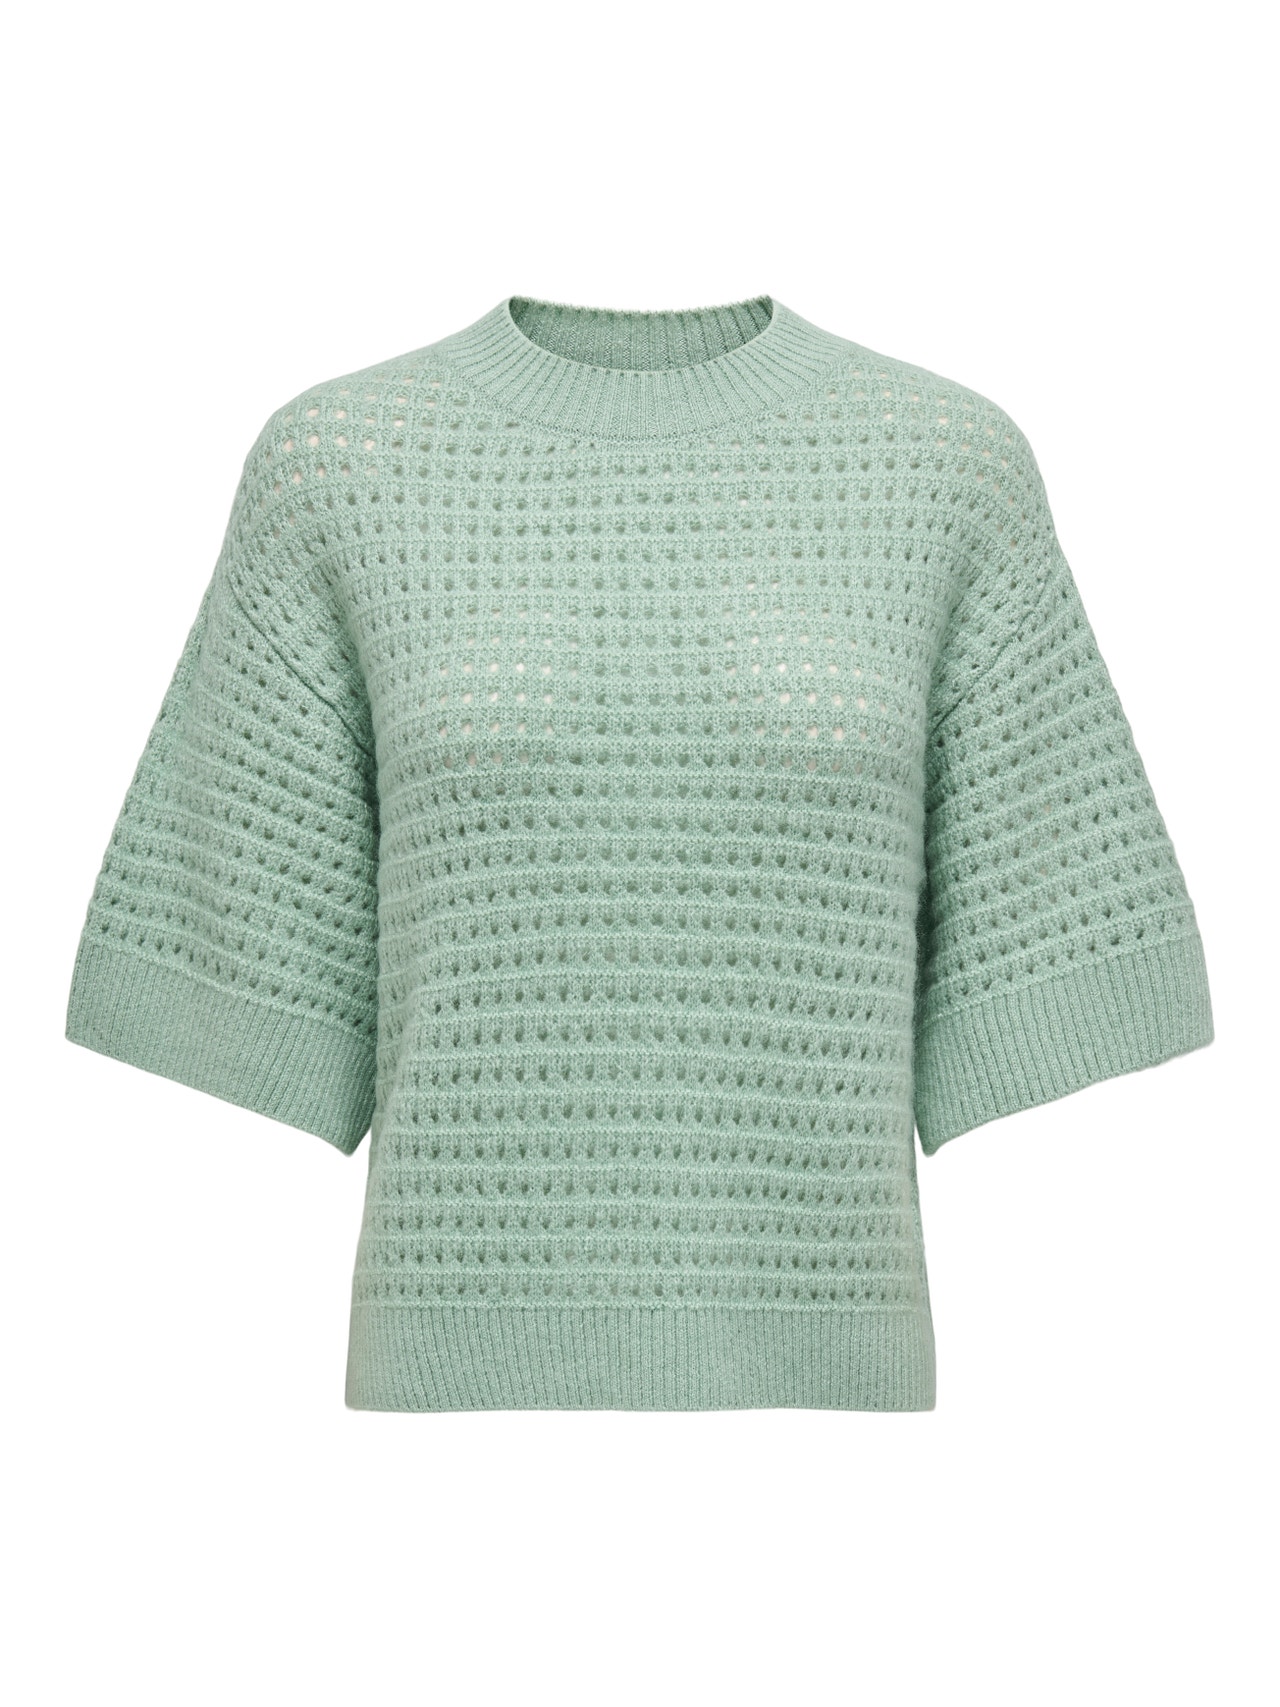 ONLY Knit Fit Round Neck Ribbed cuffs Dropped shoulders Pullover -Frosty Green - 15342482